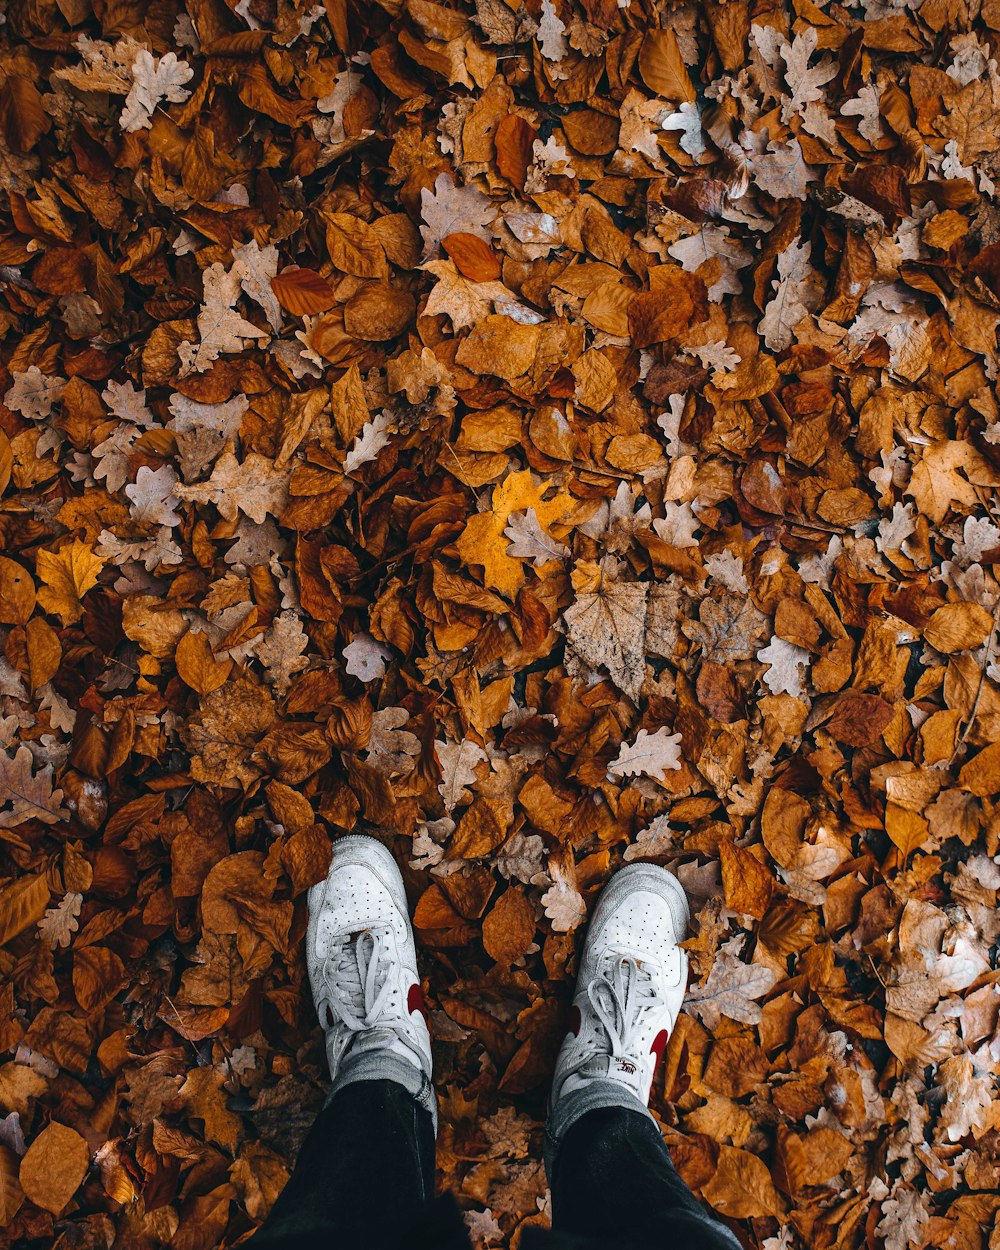 a person's feet in a pile of leaves